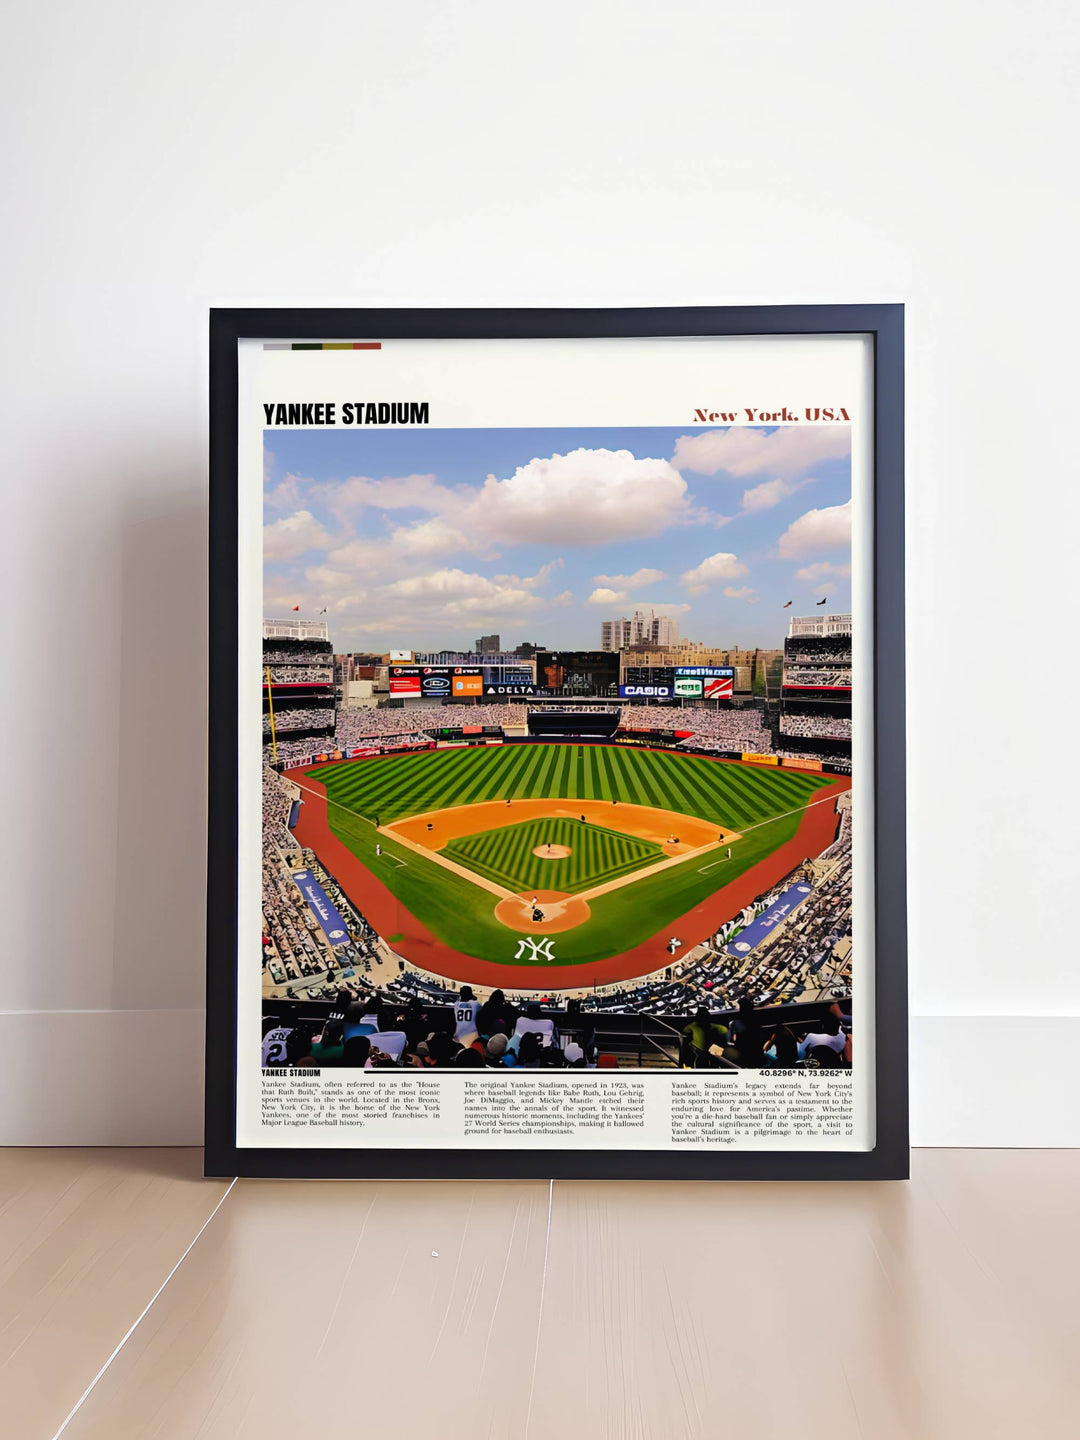 Retro New York Yankees poster featuring classic team imagery, perfect for a nostalgic sports collection display.